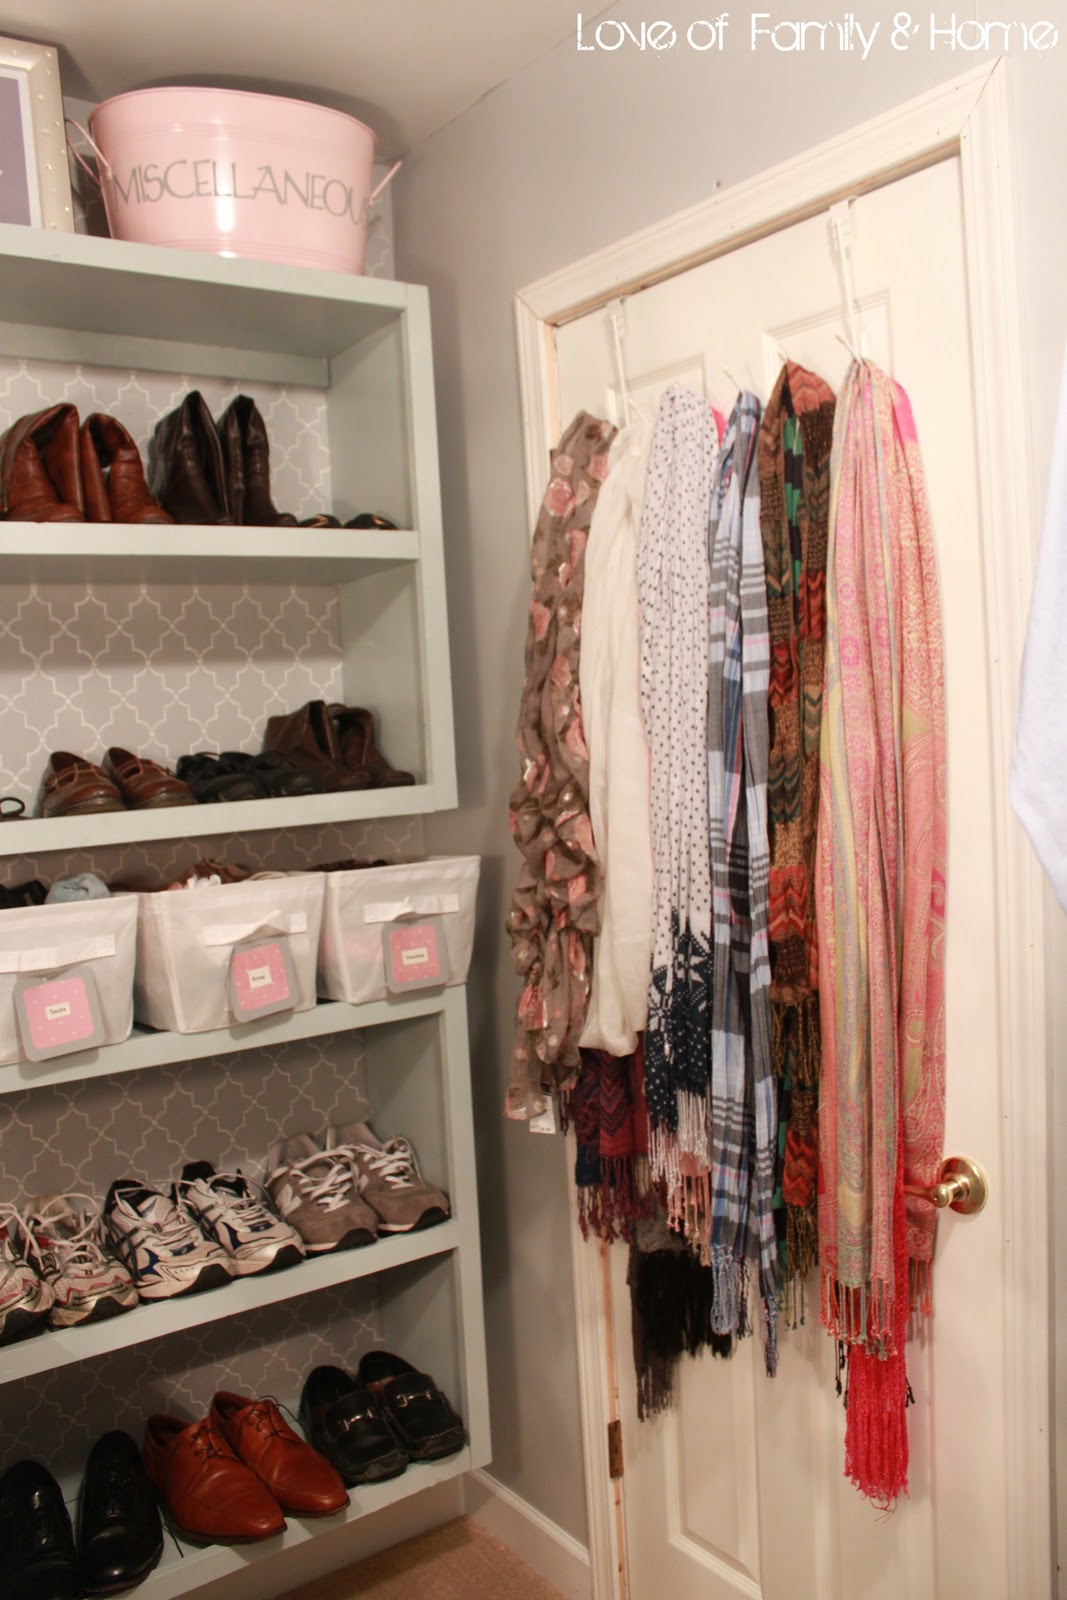 Master Closet Makeover - Blooming Homestead